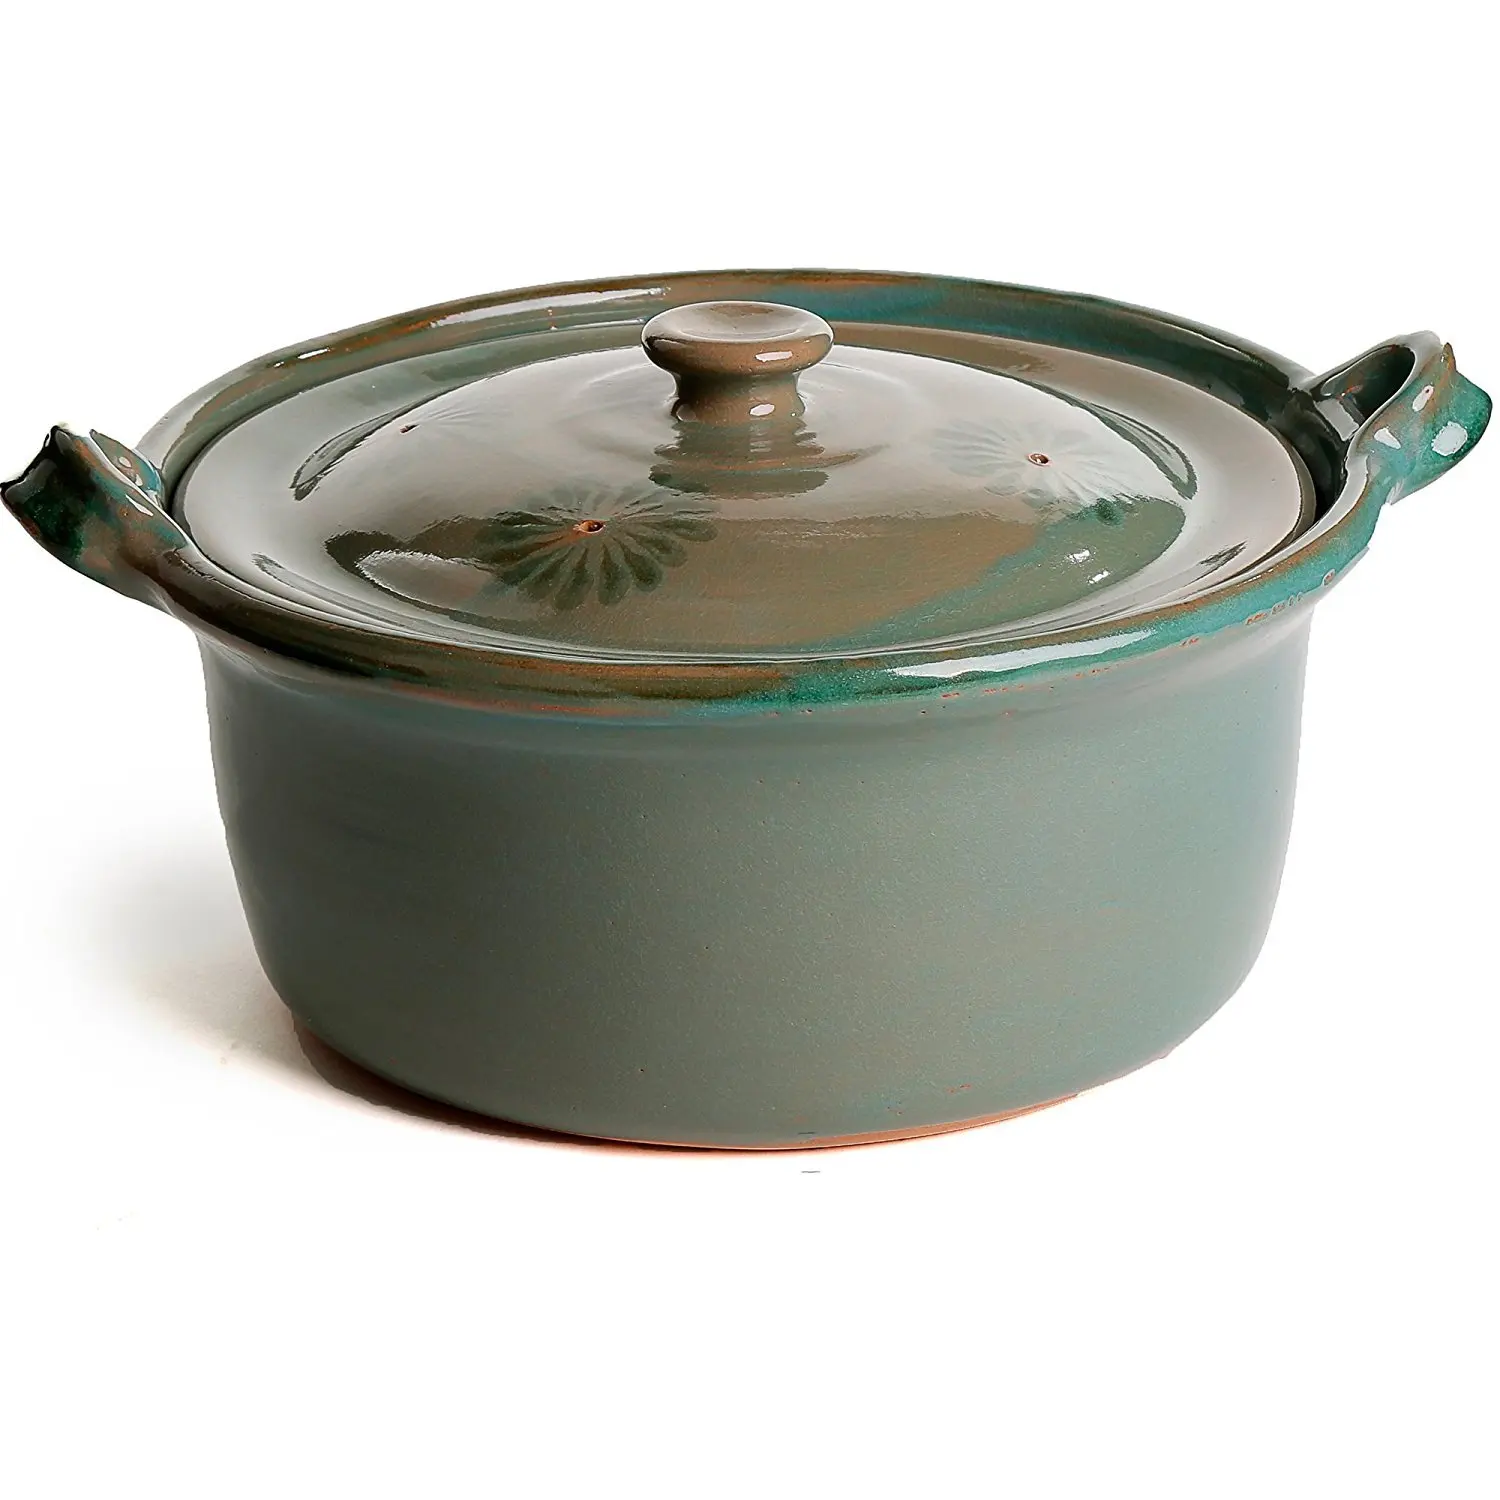 Cheap Clay Cookware India, find Clay Cookware India deals on line at ...